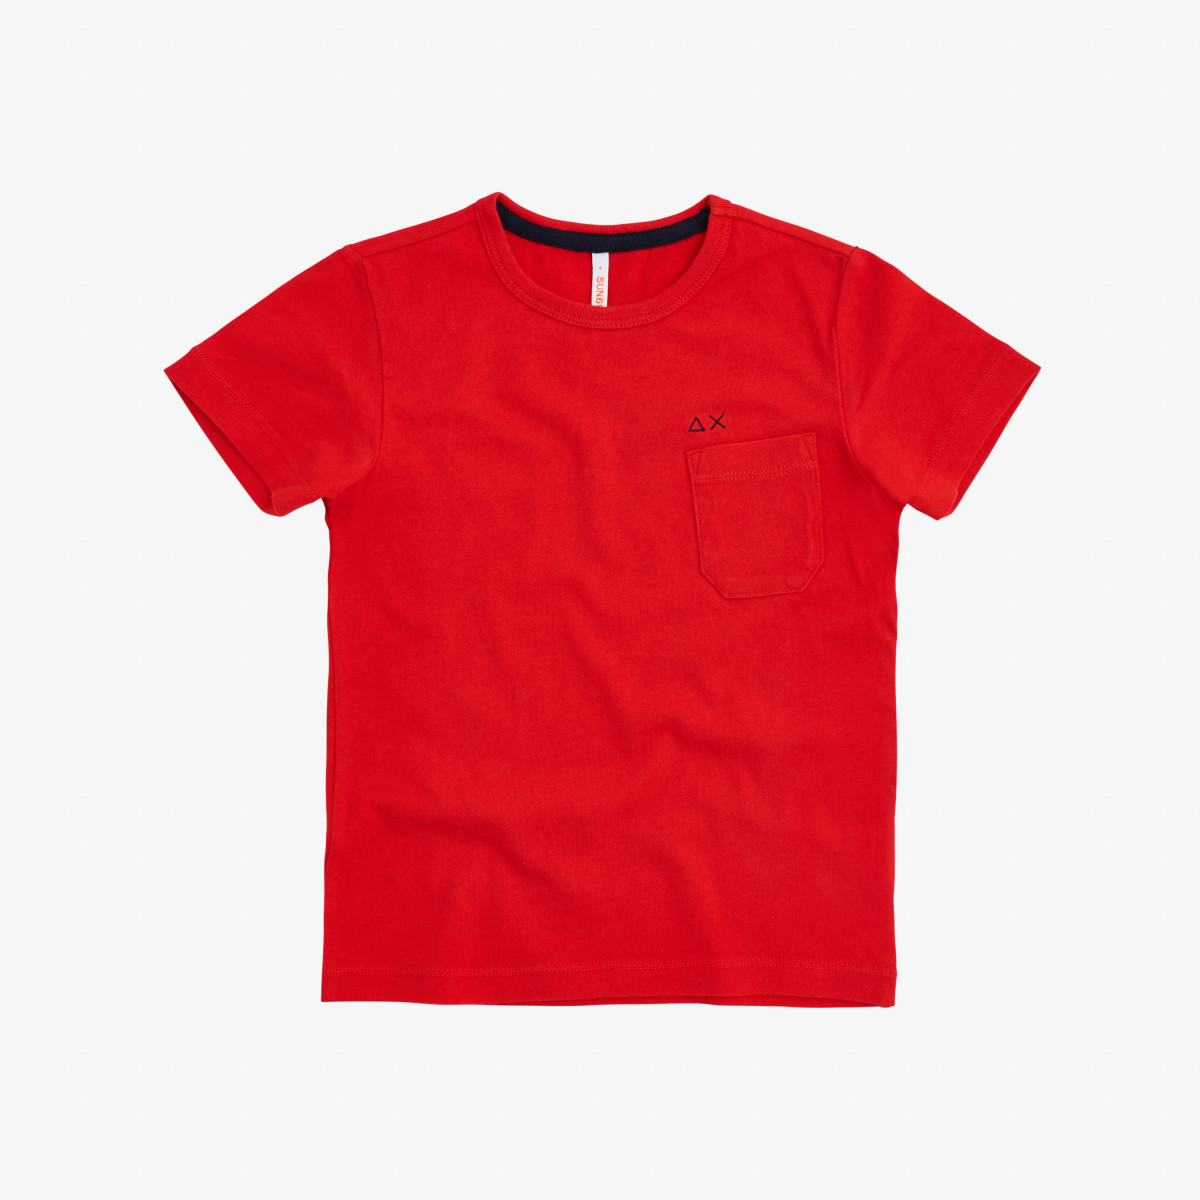 BOY'S T-SHIRT ROUND SOLID POCKET ROSSO FUOCO